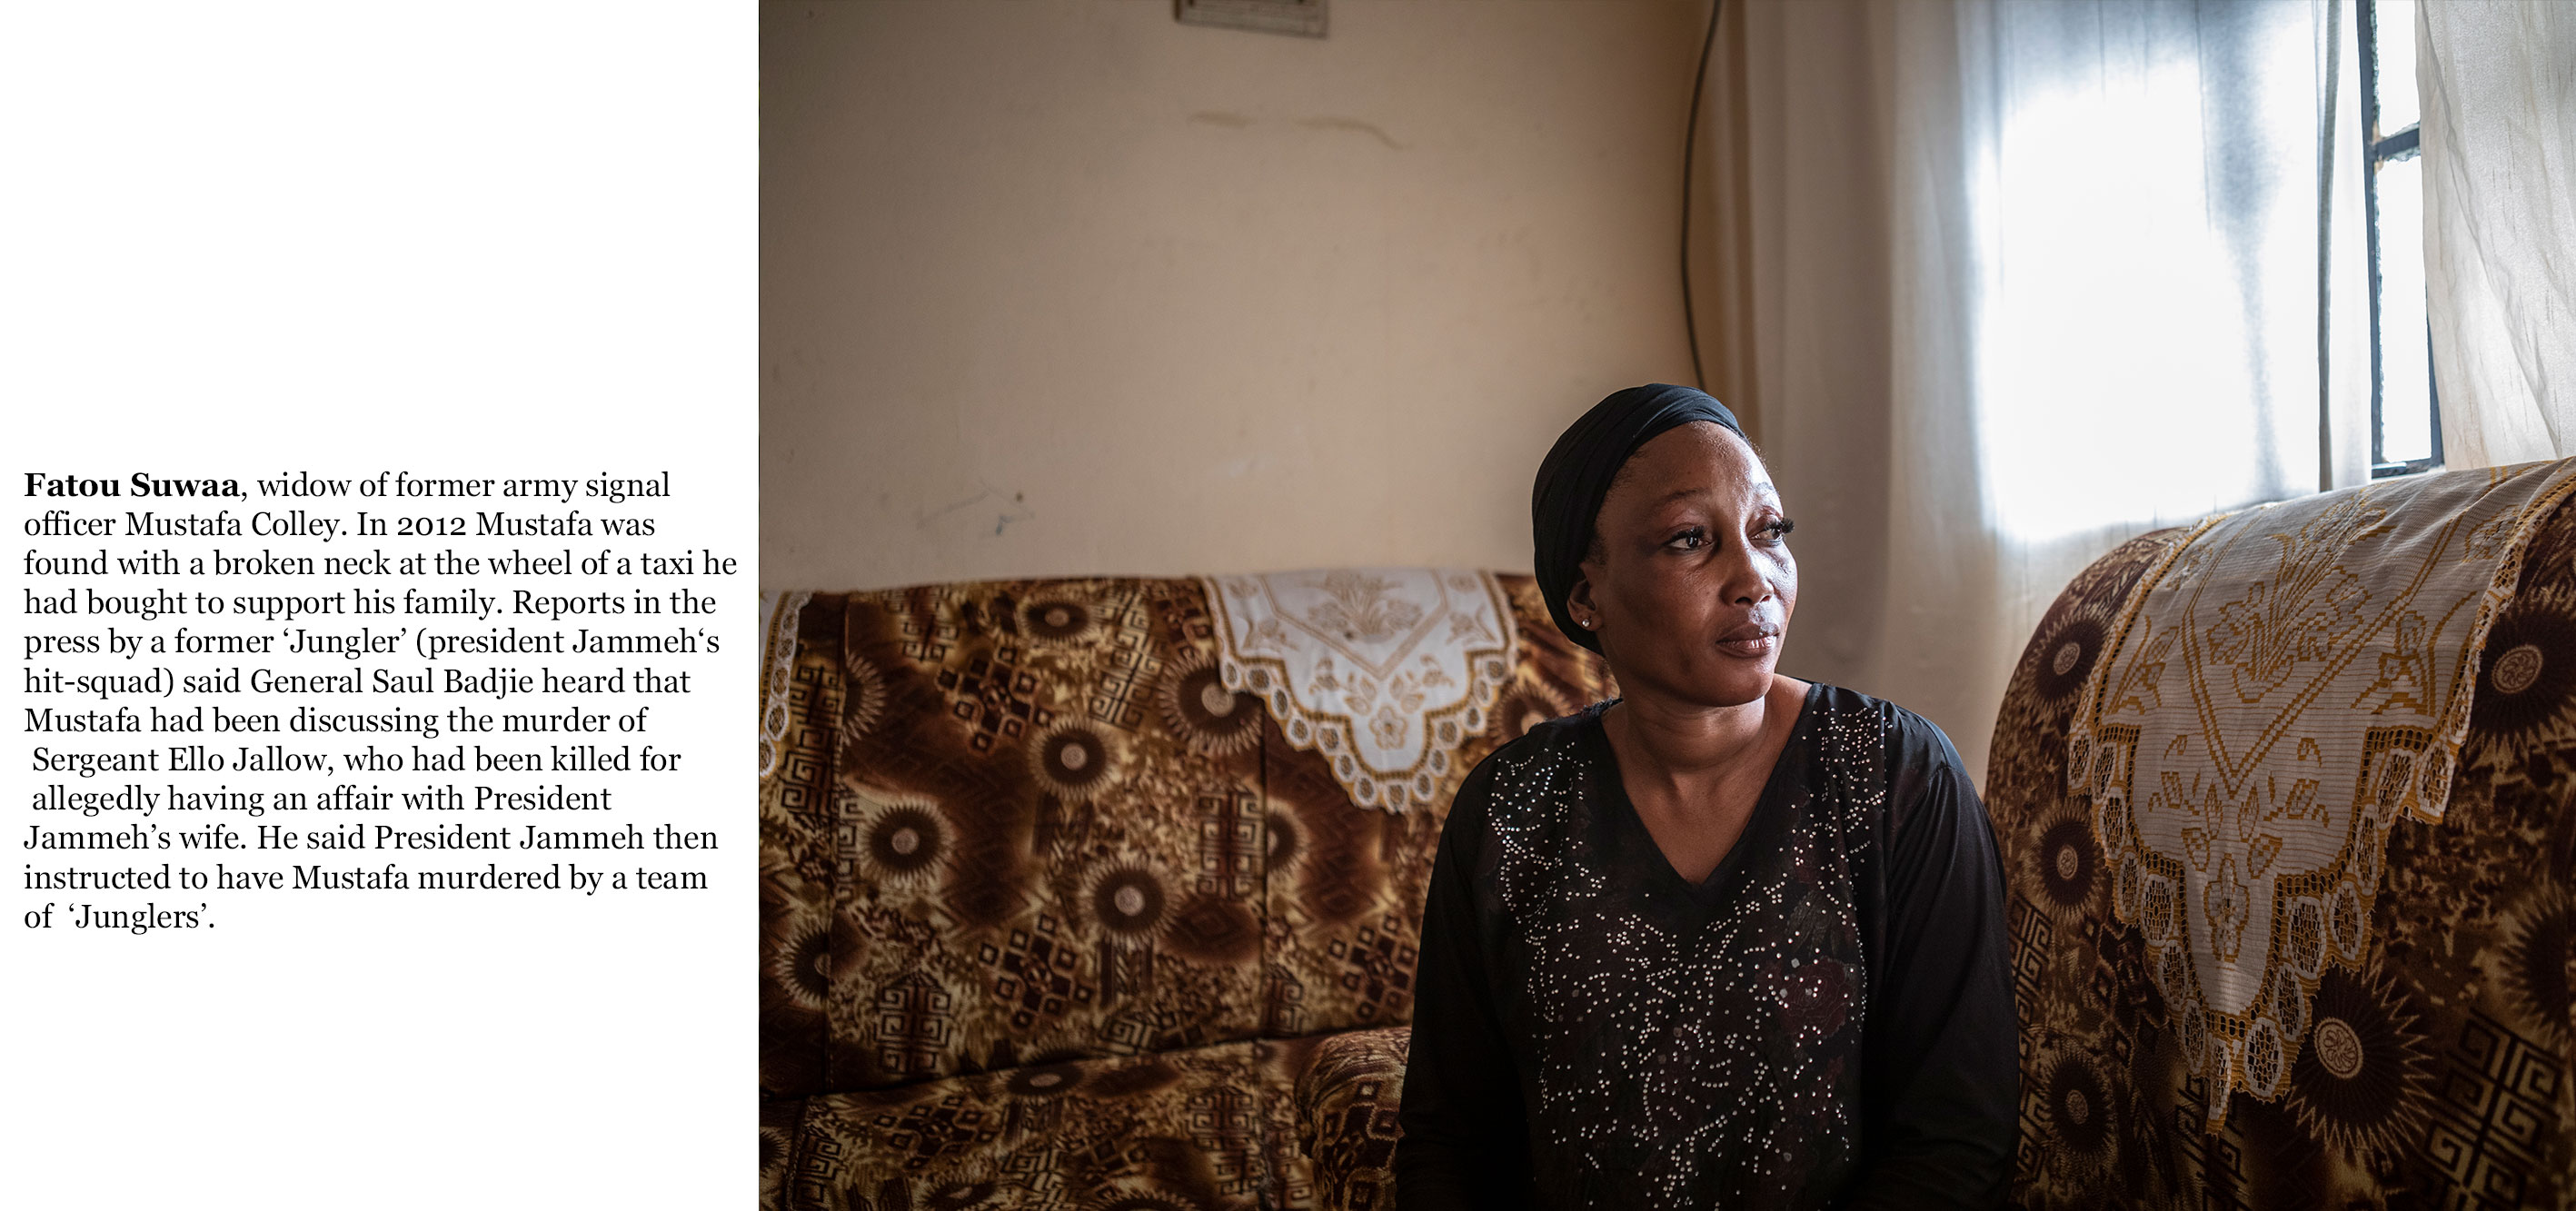 Gambia victims and resisters -Fatou_Suwaa wife of army signal officer, Mustafa Colley who in 2012 was found with a broken neck at the wheel of his taxi _6994_TEXT_web ©Jason Florio